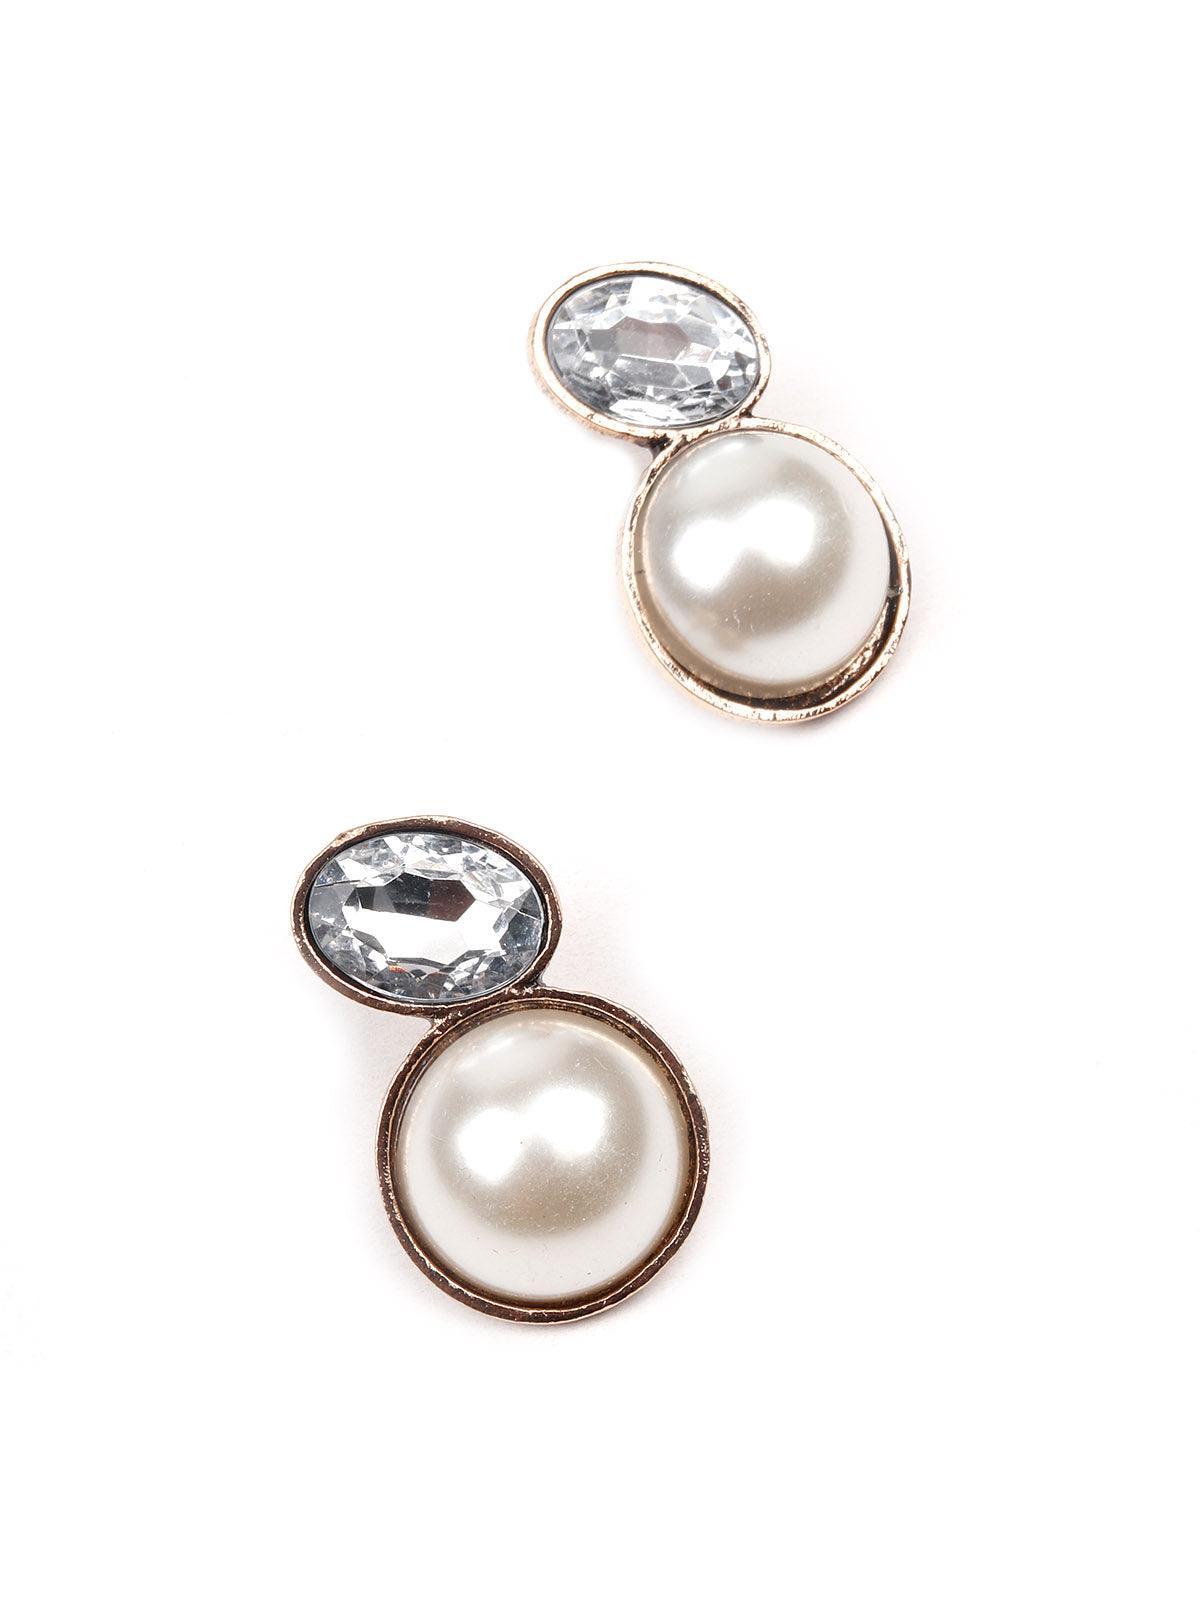 Women's Exquisite Rounded Statement Earrings - Odette